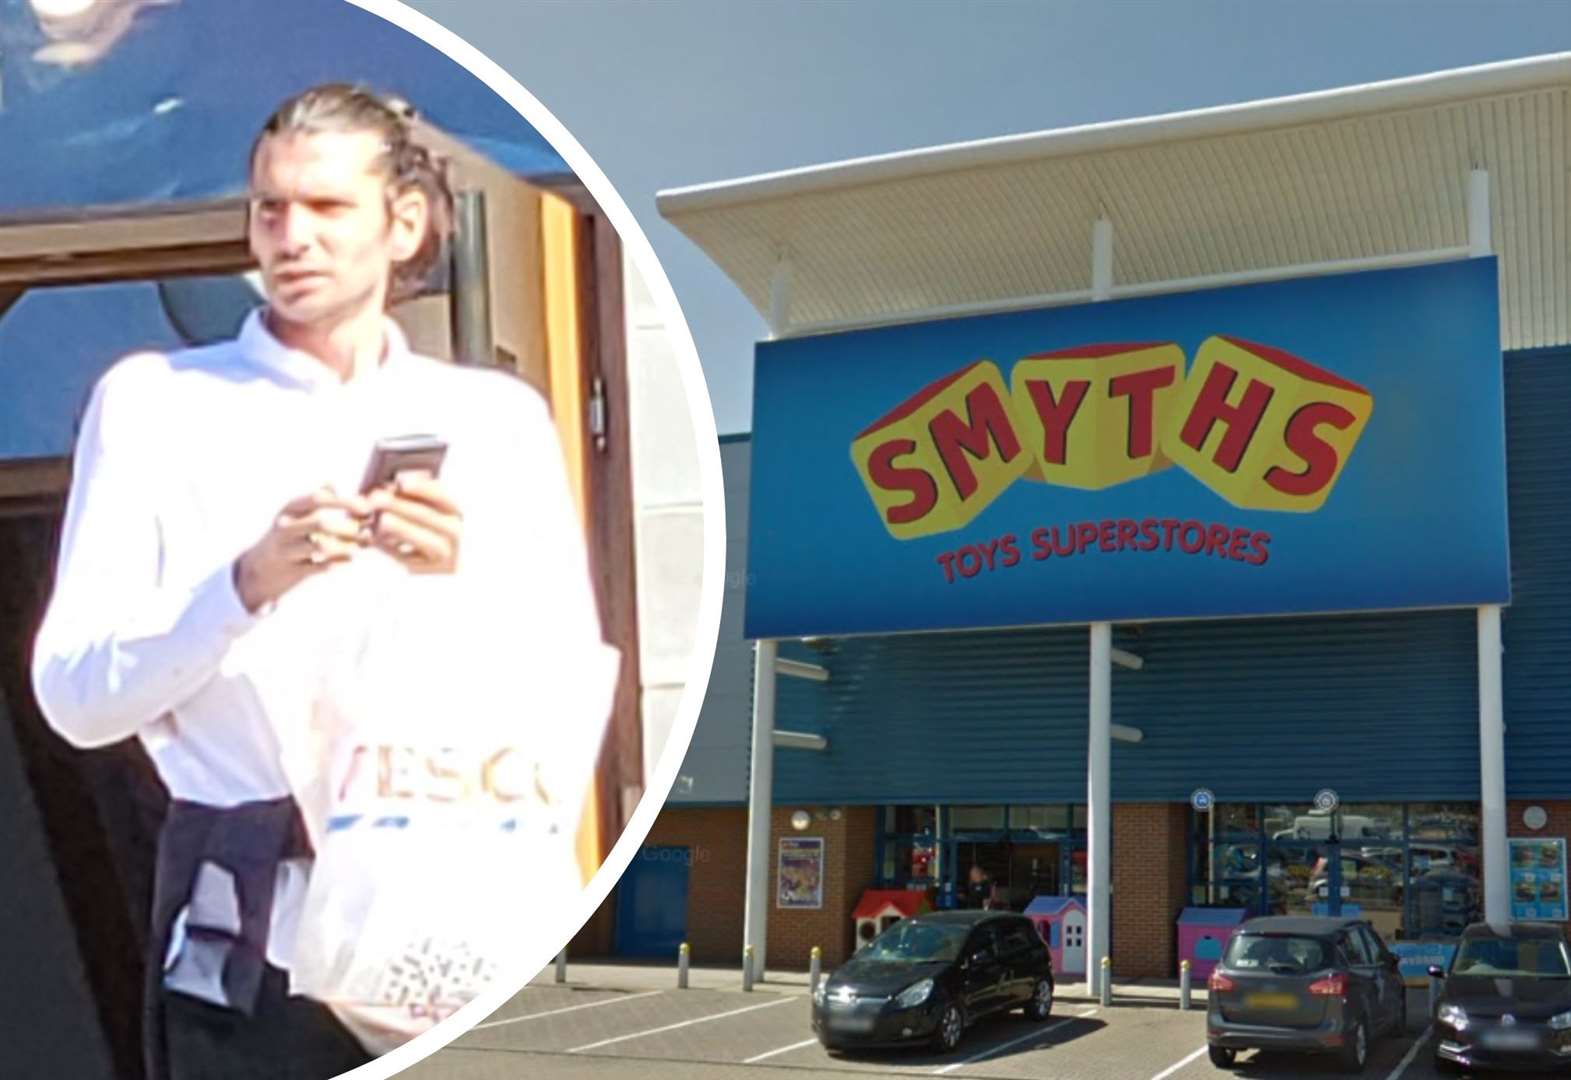 Laurence Pata, a Harry Potter Lego Thief, stole goods at Smyths Toys in Ashford Retail Park